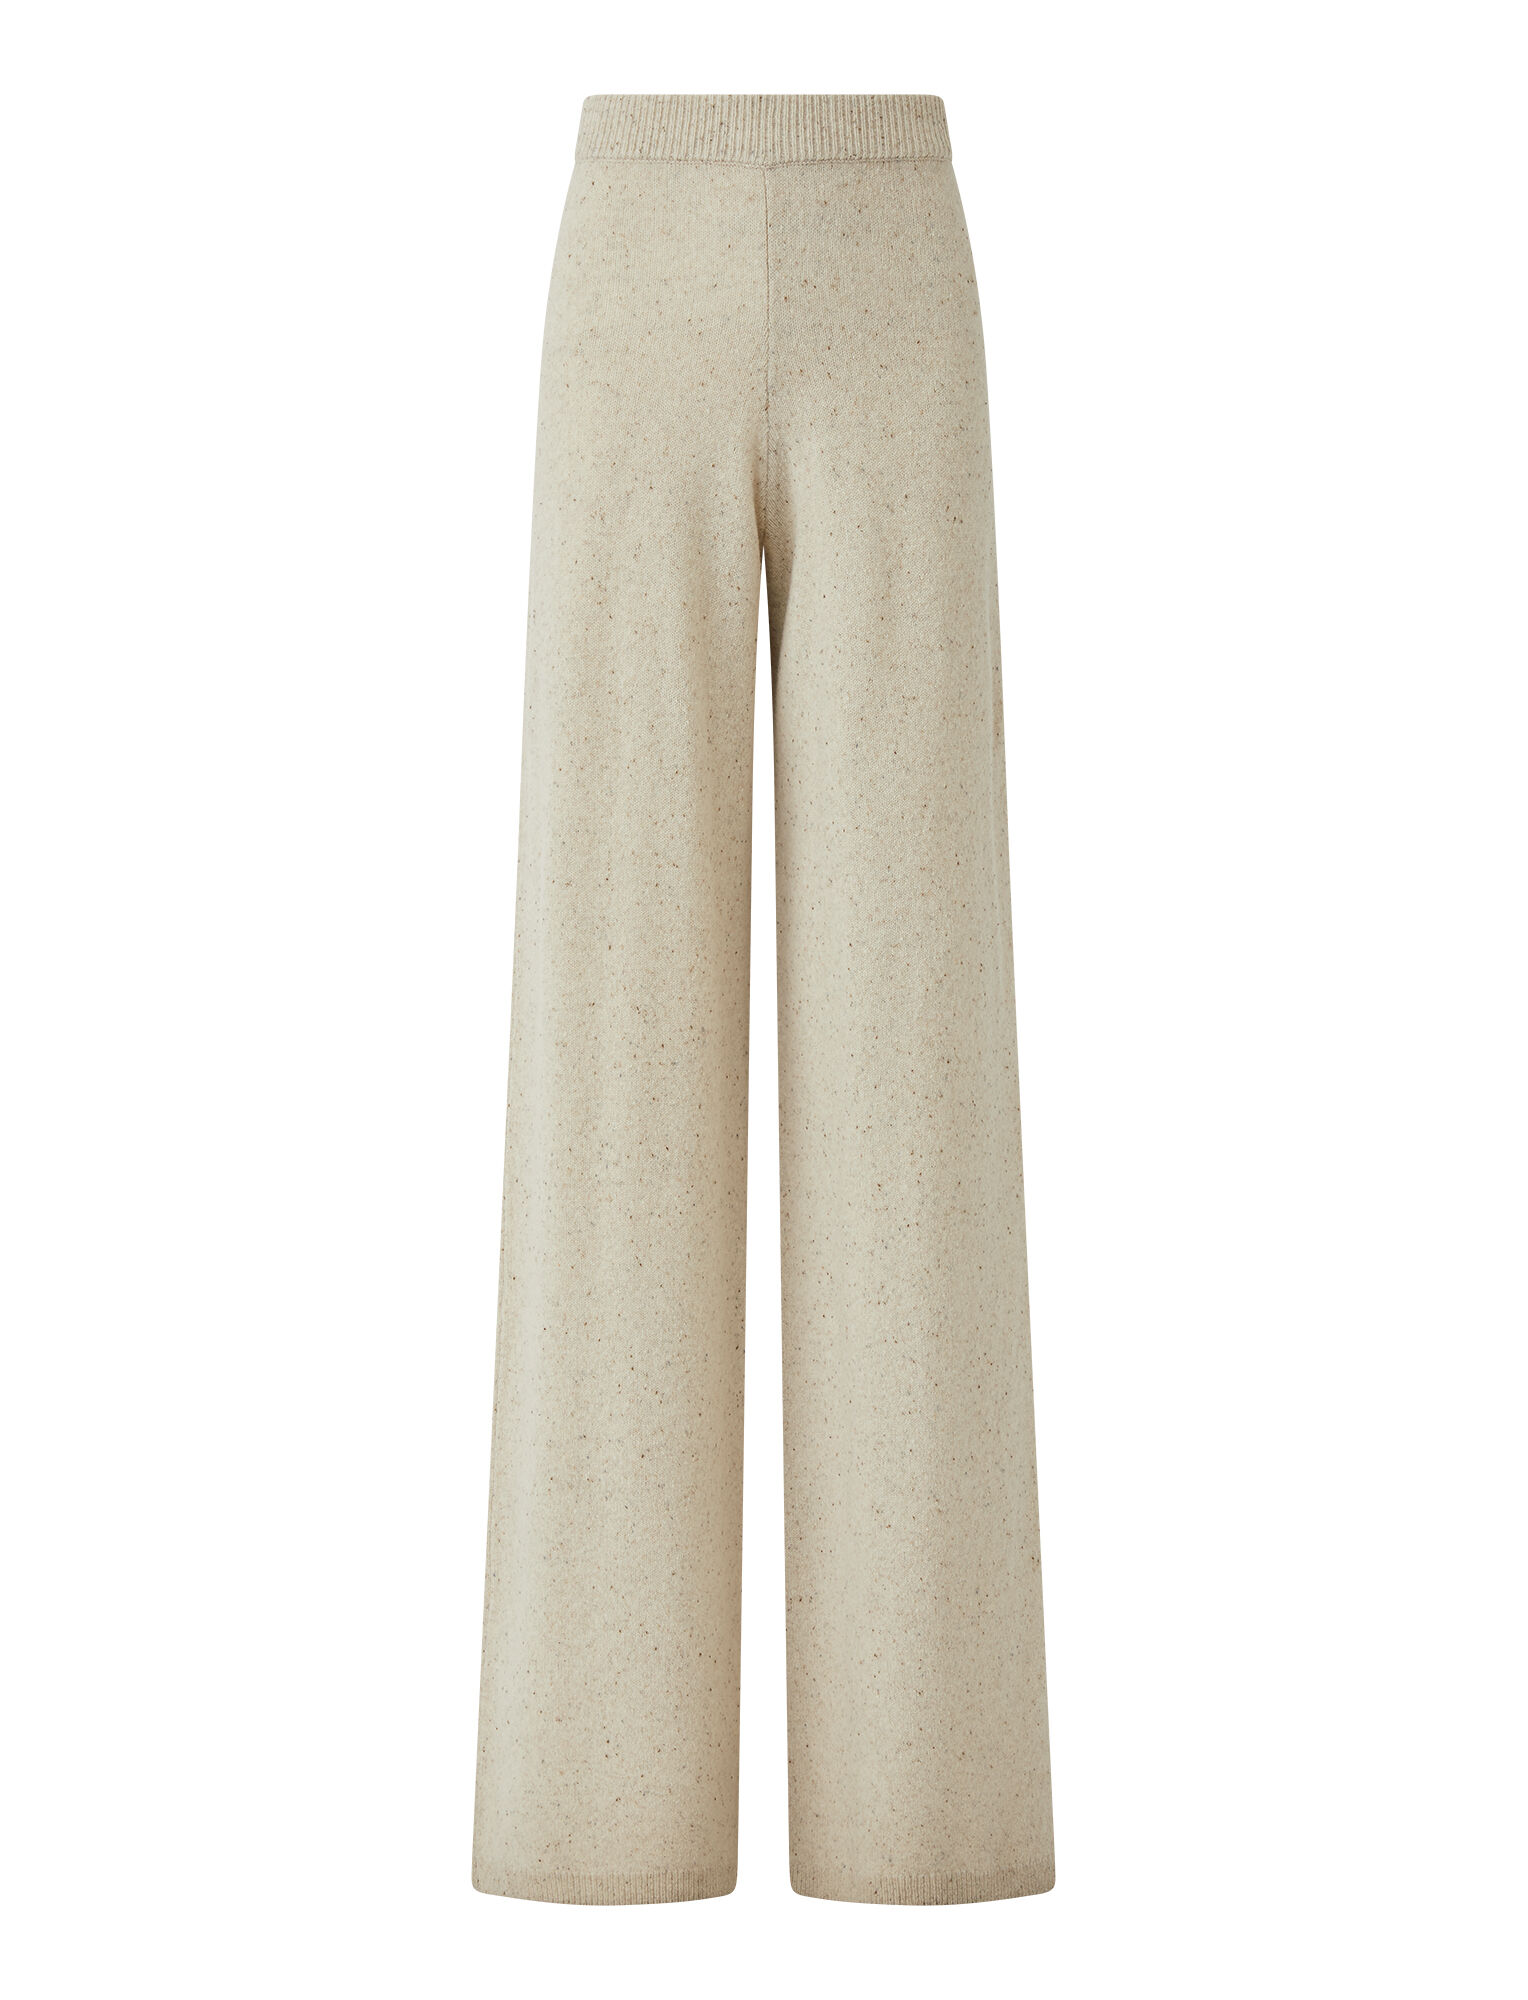 Joseph, Tweed Knit Trousers, in SANDSHELL